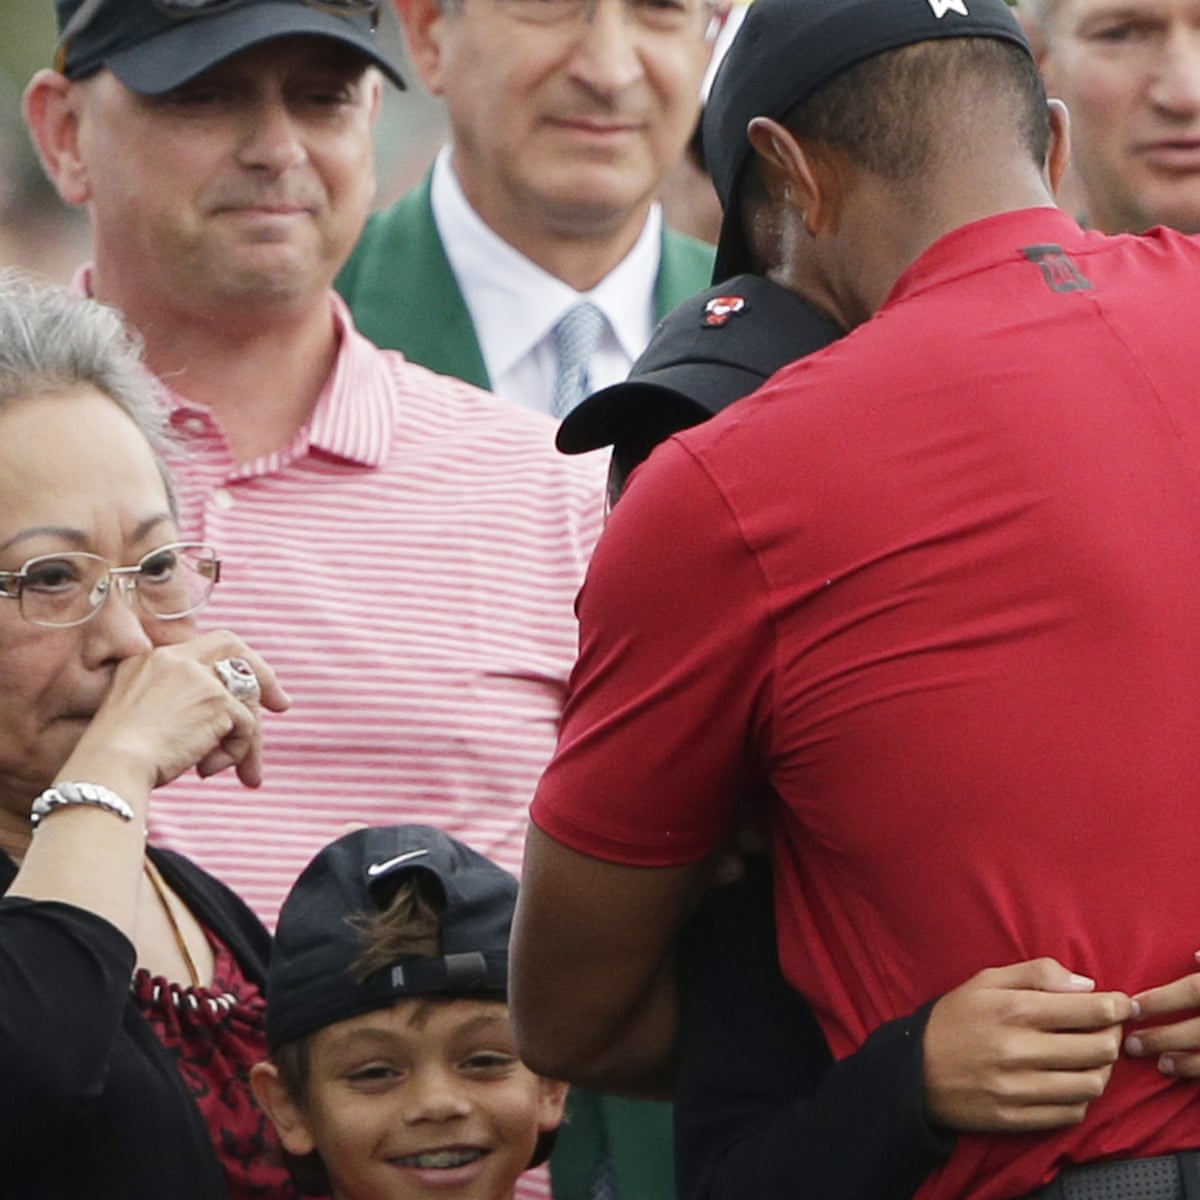 Tiger Woods S Son Can Play But Less Clear Is Where Things Go From Here Tiger Woods The Guardian